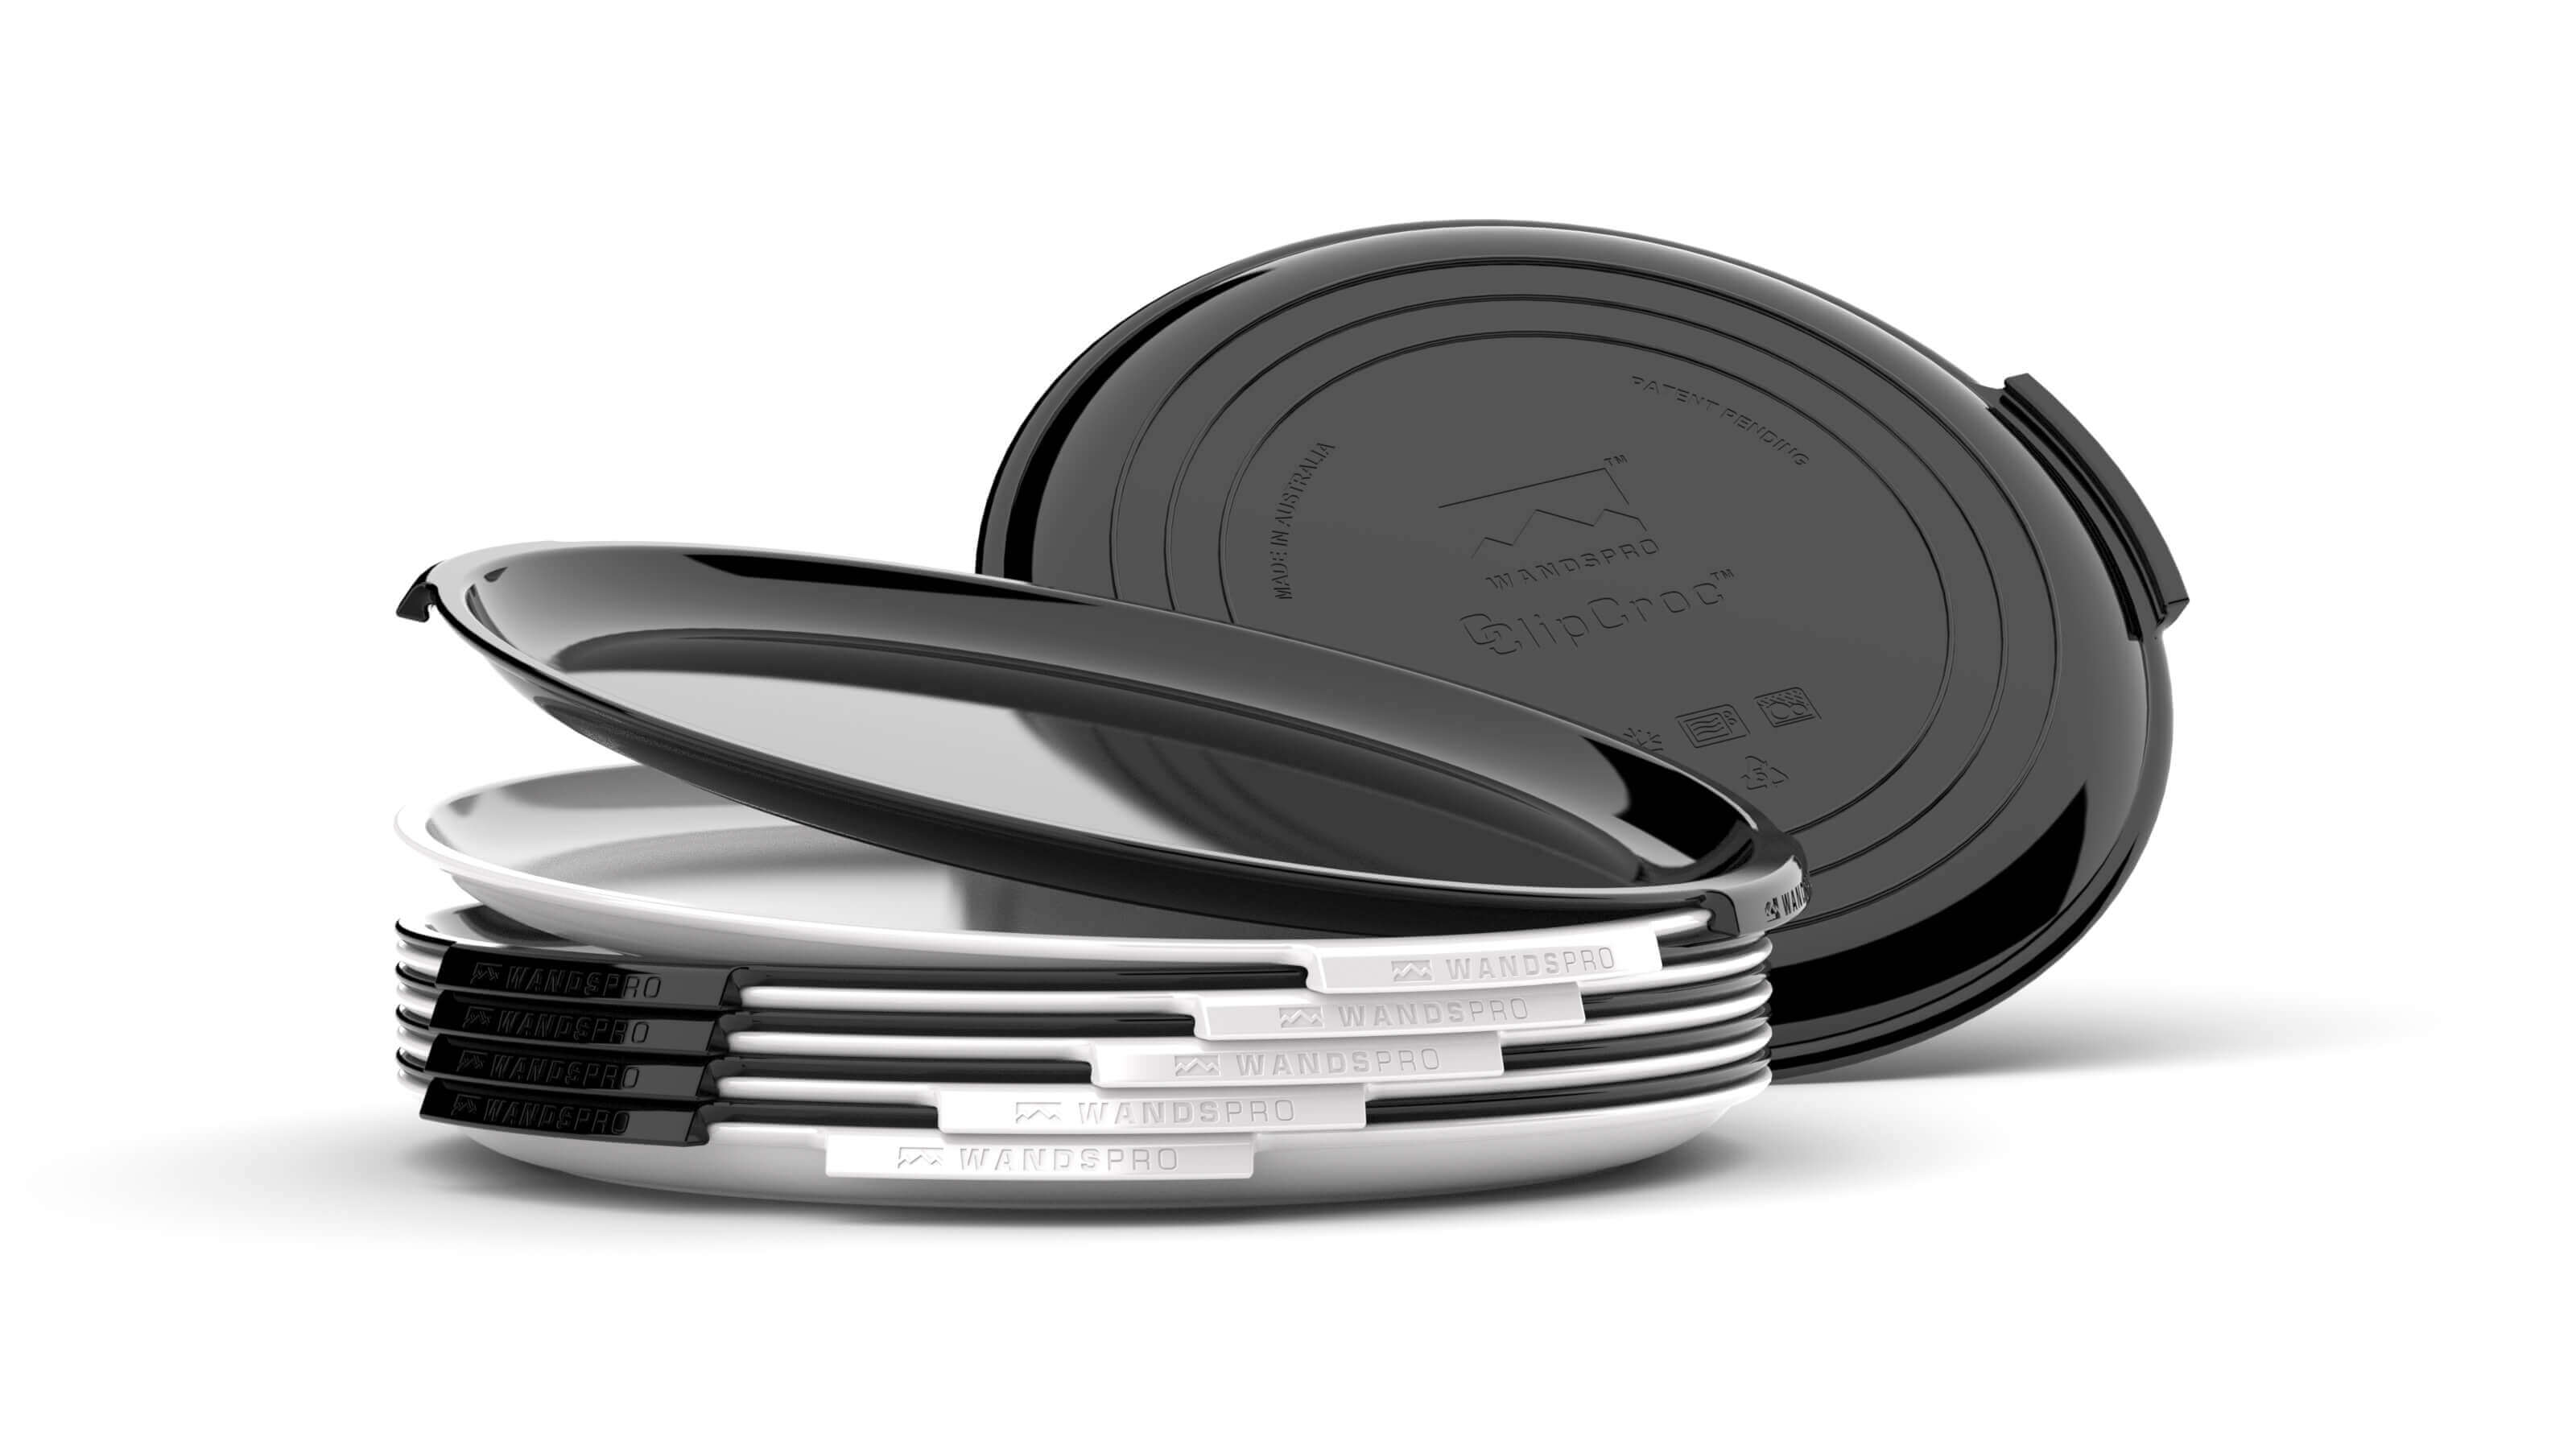 Clipcroc™ Plate Set in Midnight black and Ice white by WandsPro